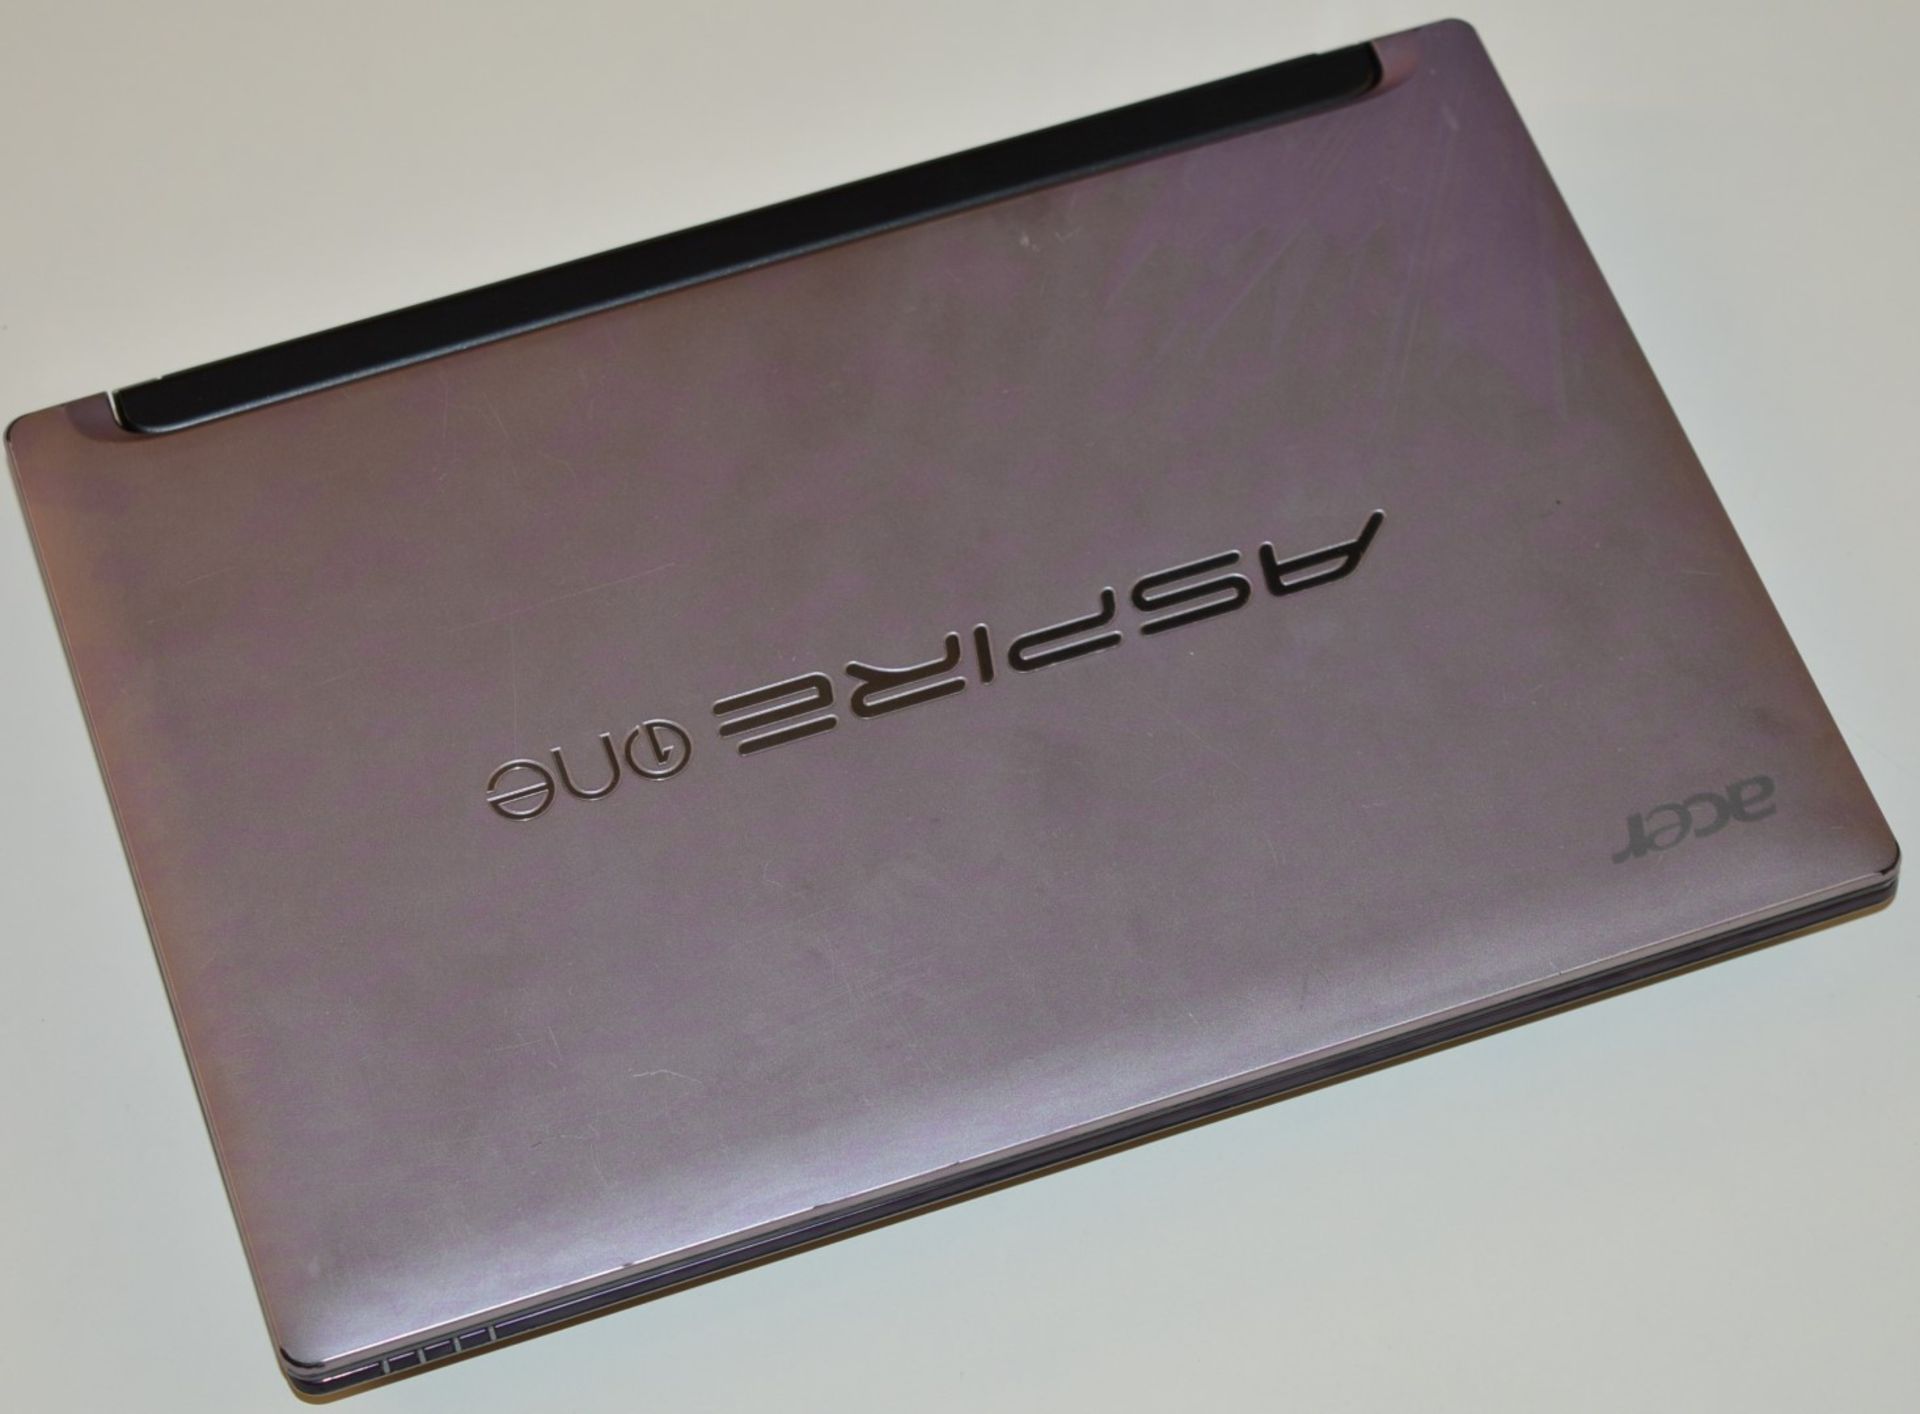 1 x Acer Aspire One Netbook Computer - Features 10 Inch Screen, 250gb Hard Drive, 1gb Ram, Intel 1. - Image 8 of 13